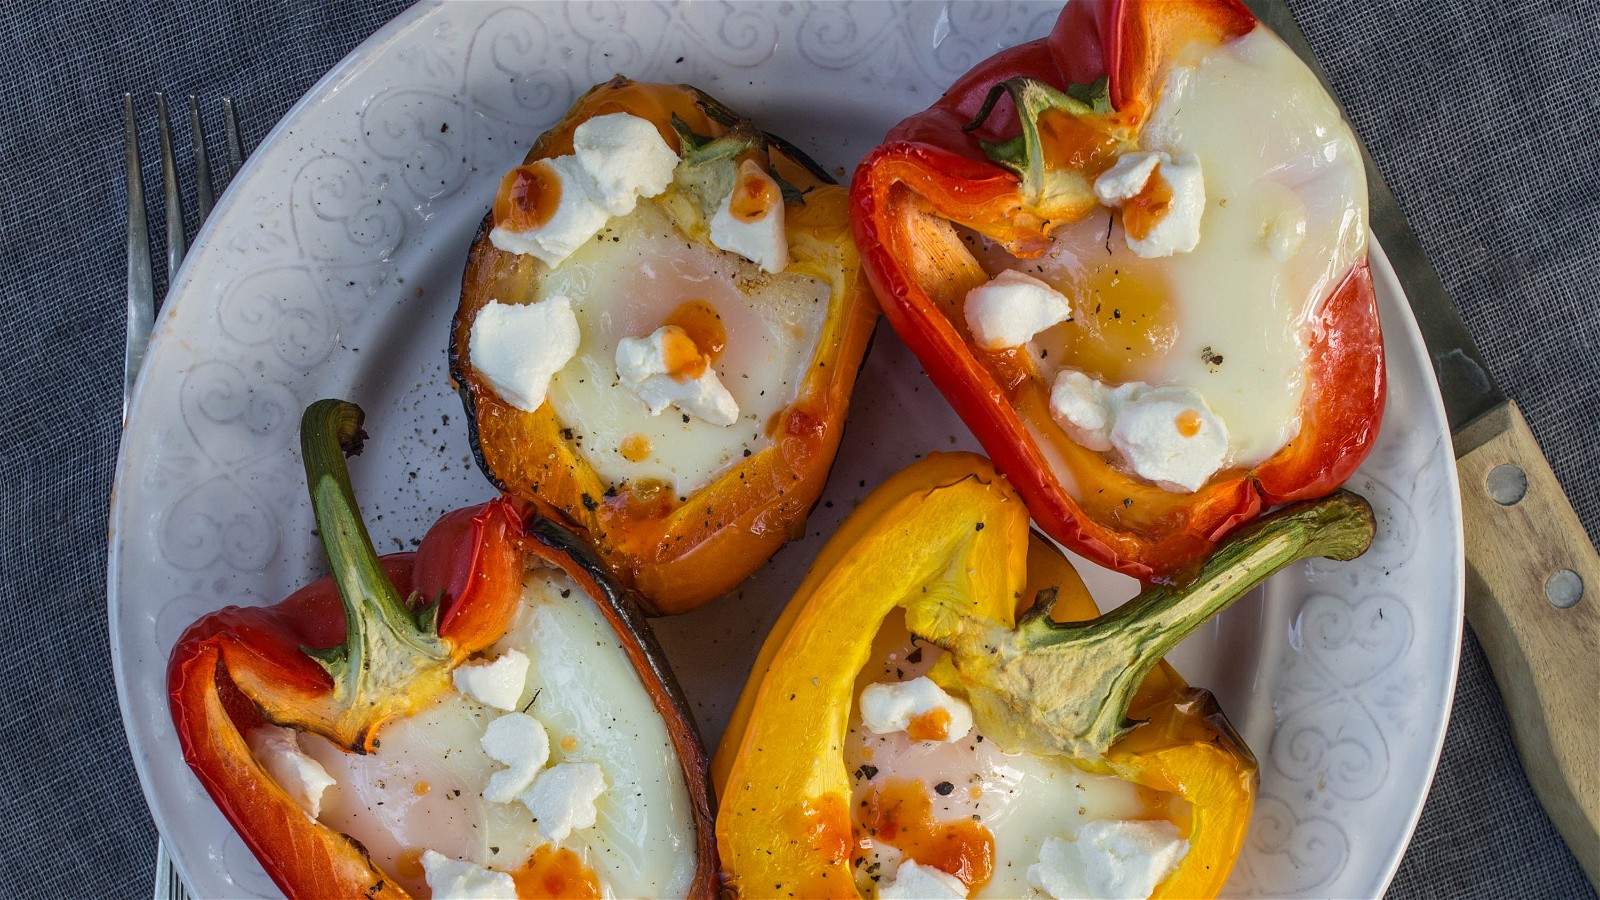 Image of Grilled Bell Peppers Recipe with Baked Egg, Goat Cheese, and Hot Sauce